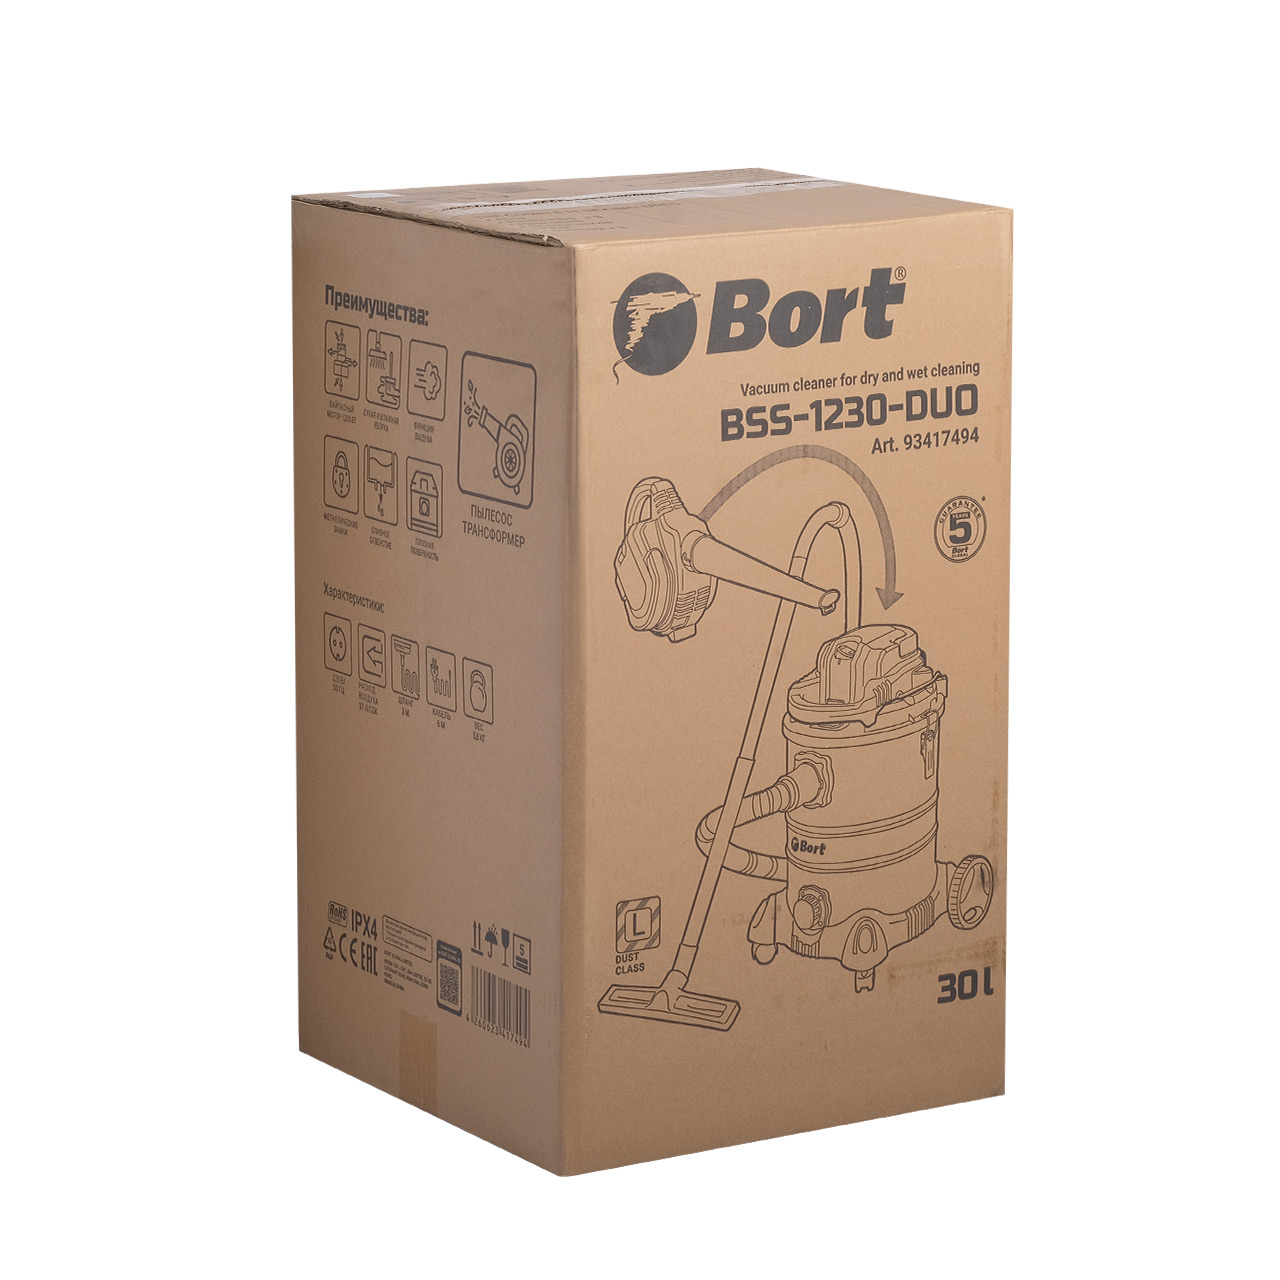 Vacuum cleaner for dry and wet cleaning BORT BSS-1230-DUO